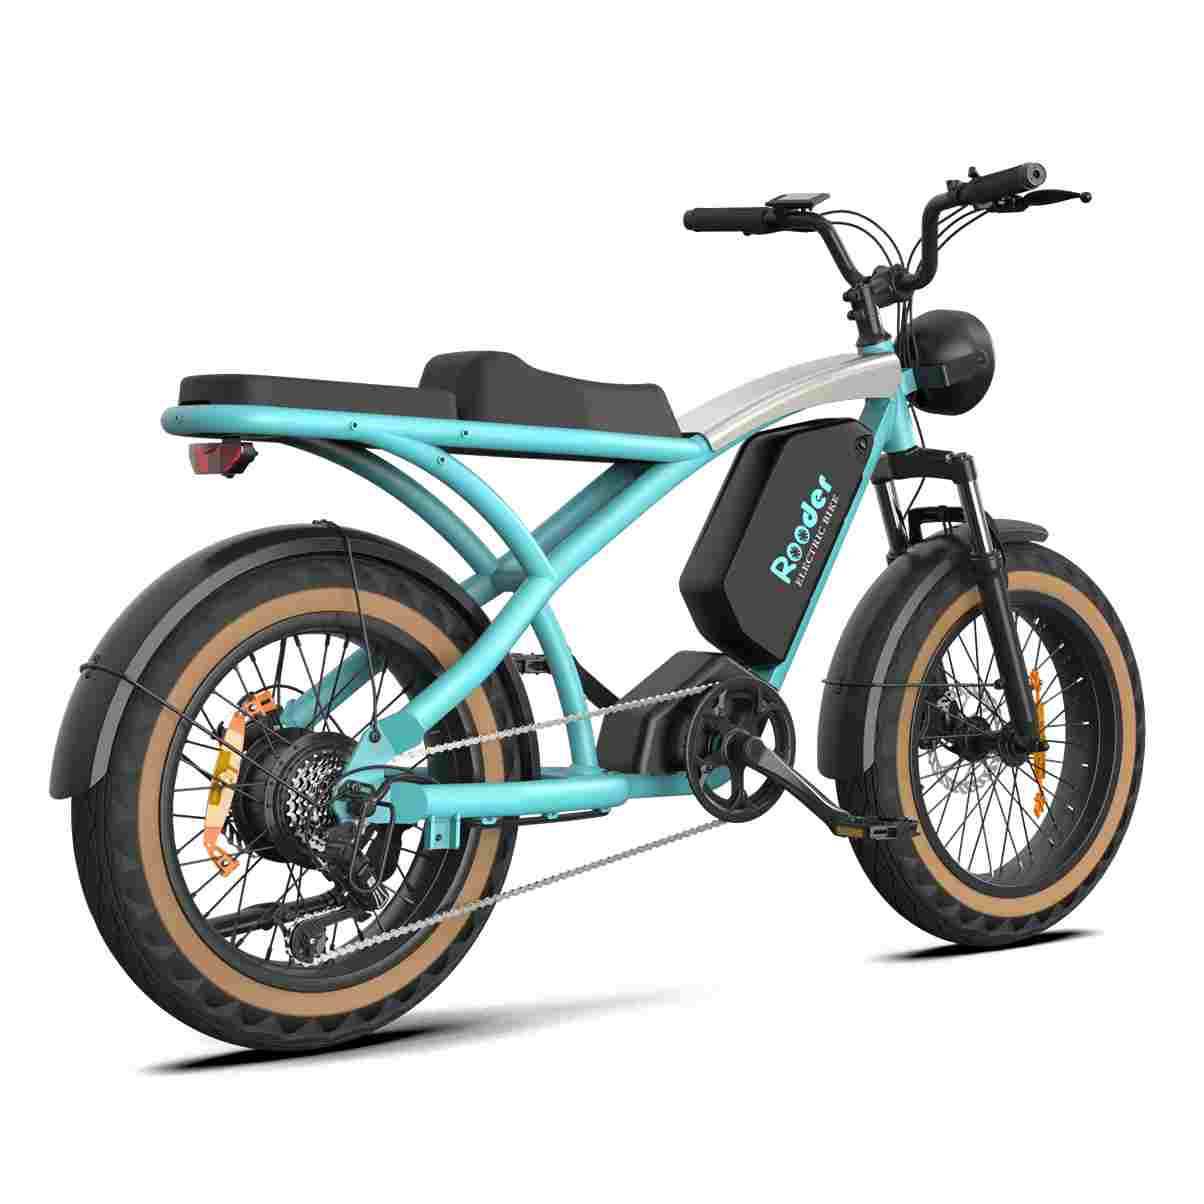 Powerful Electric Motorcycle wholesale price